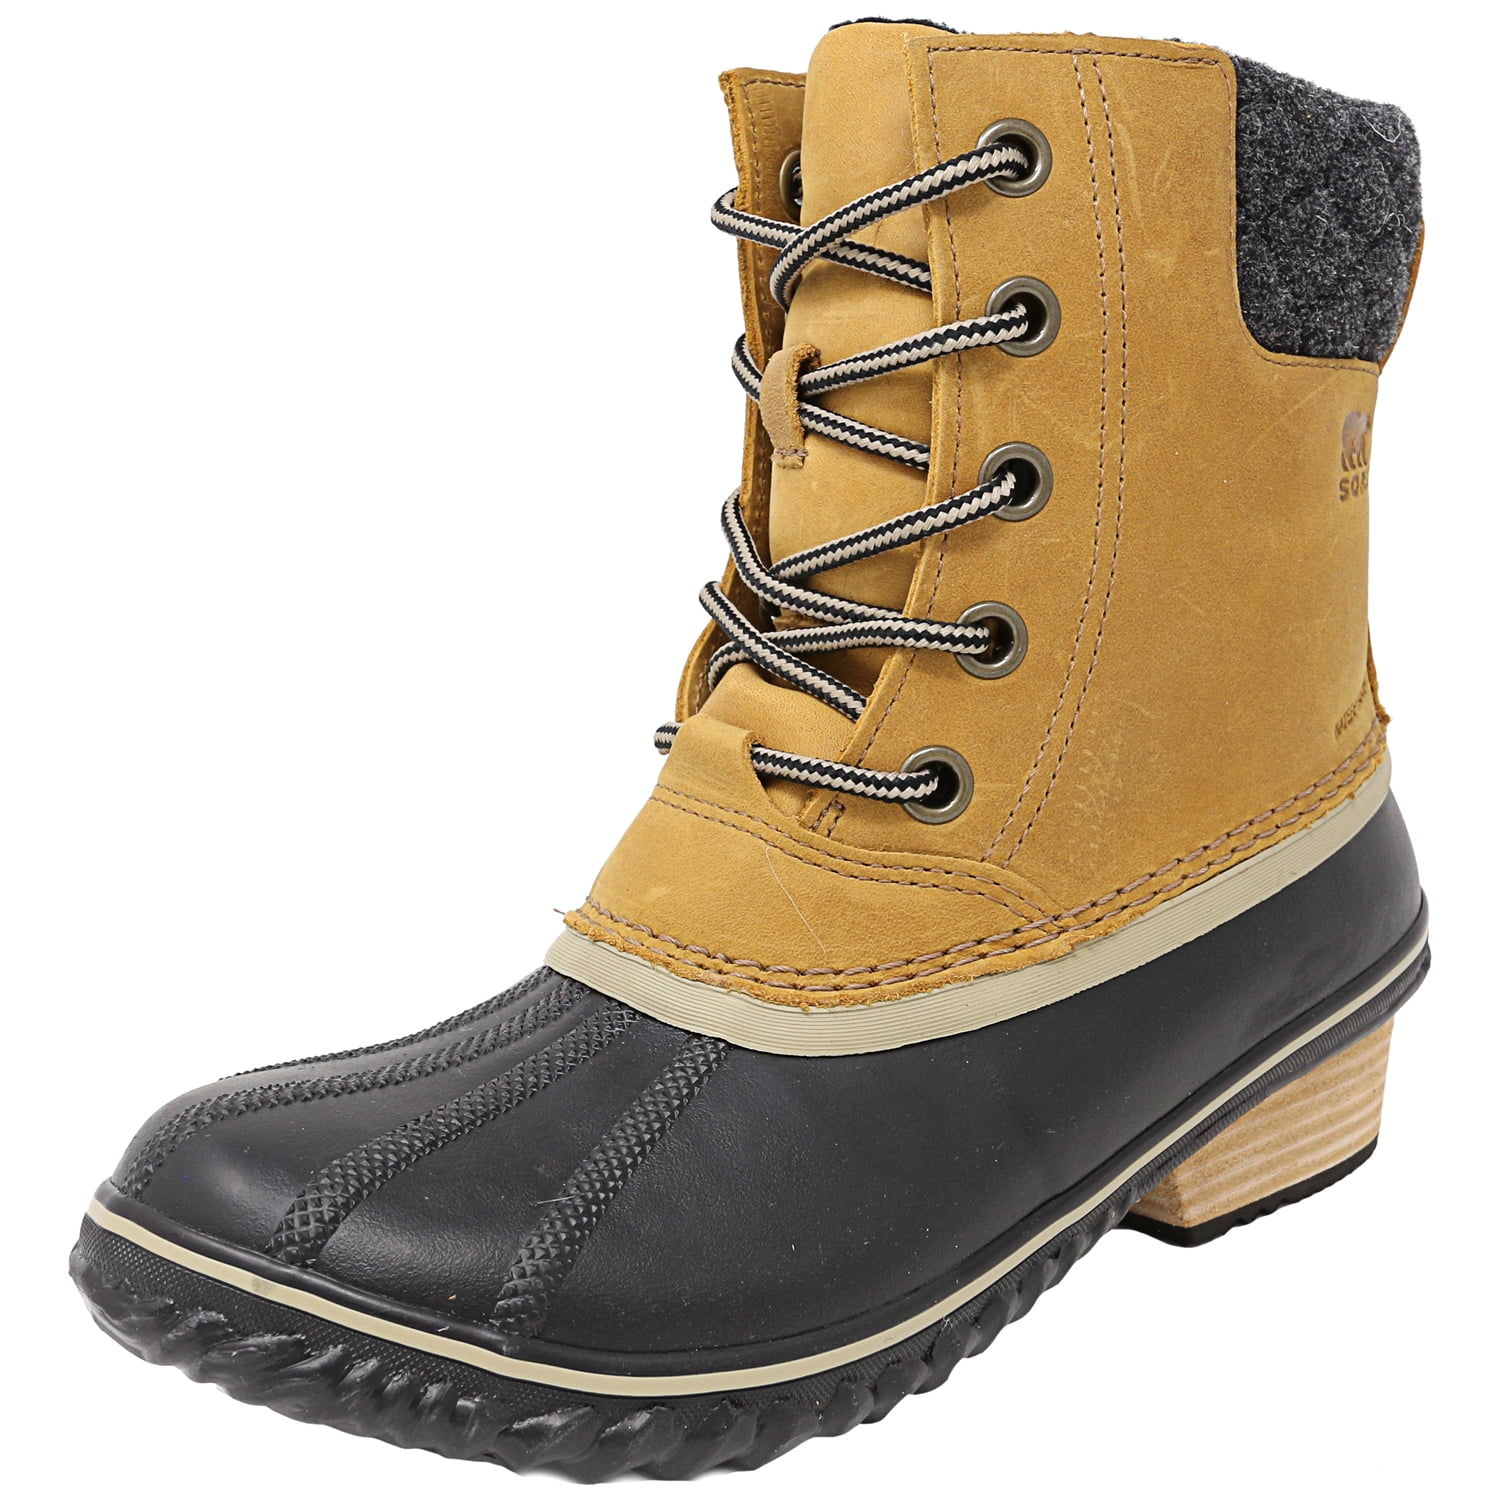 SOREL Womens Slimpack Lace Ii Snow Boot Snow Boots Shoes